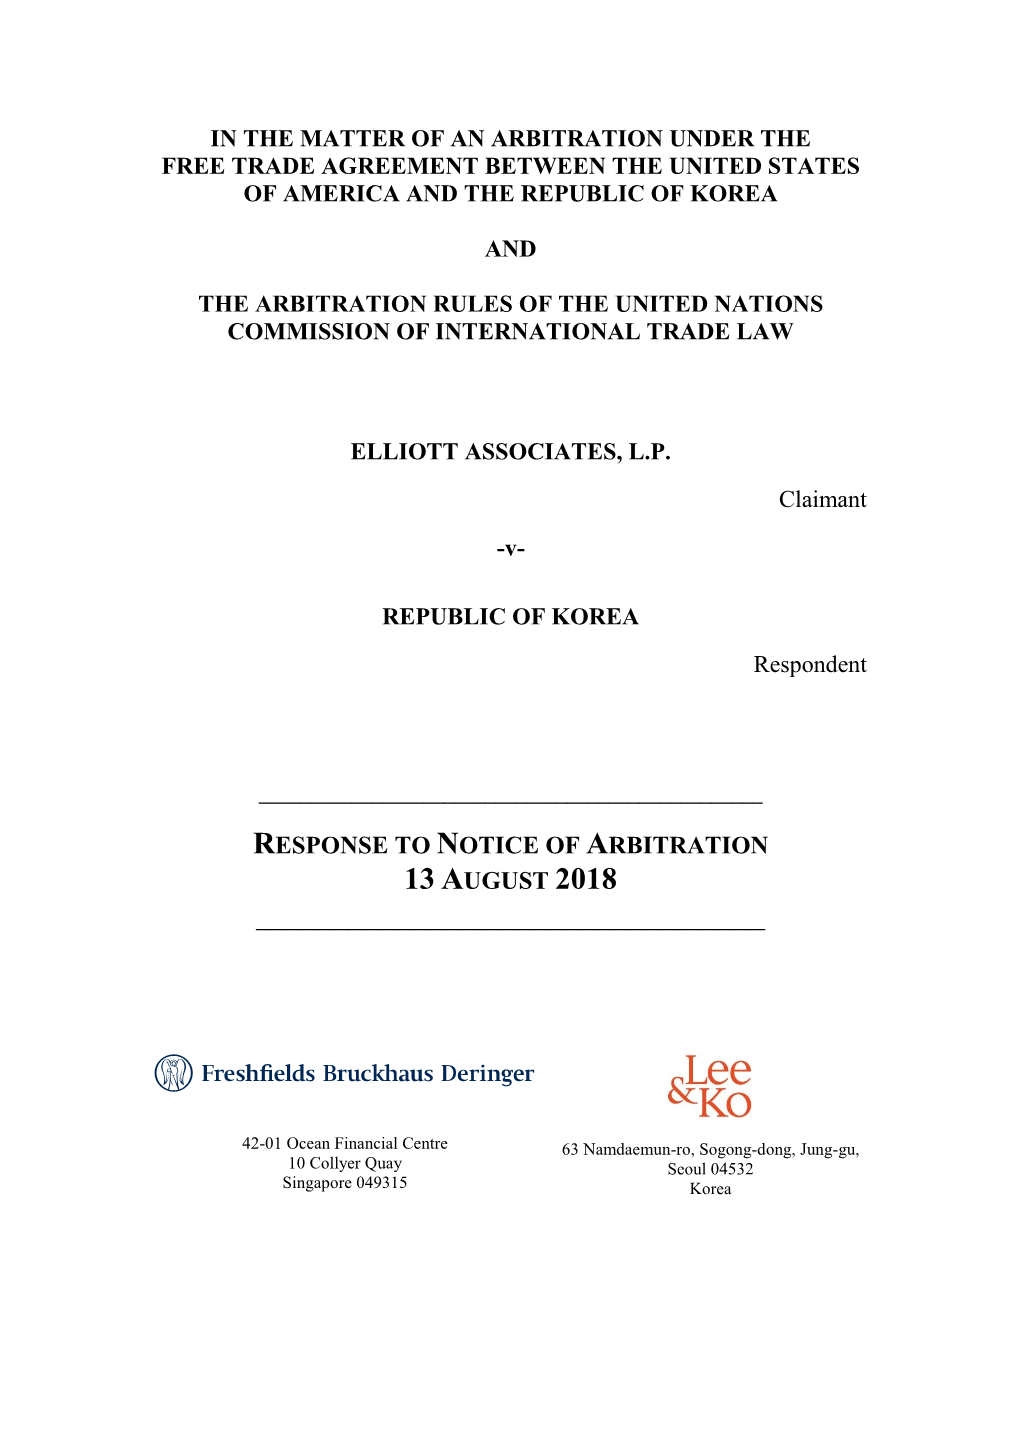 In the Matter of an Arbitration Under the Free Trade Agreement Between the United States of America and the Republic of Korea